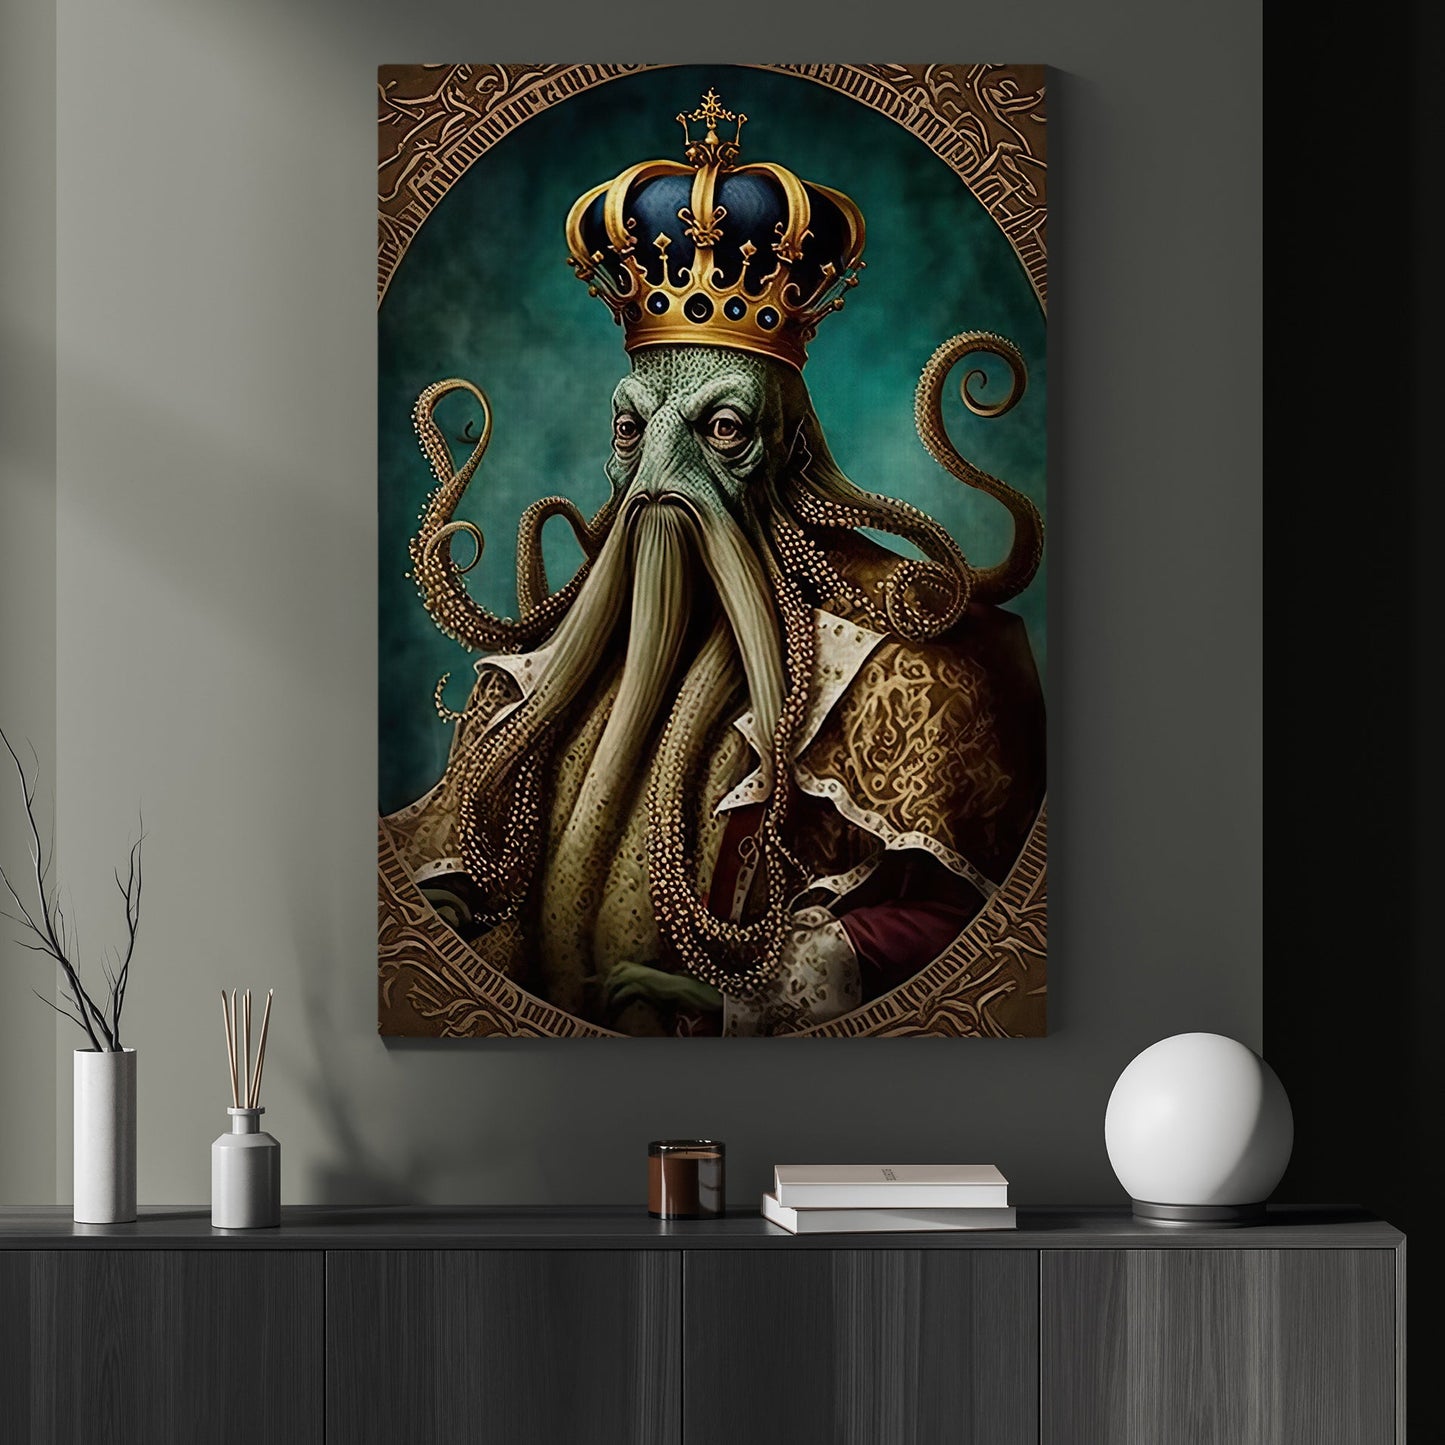 Victorian Octopus Canvas Painting, Gothic Wall Art Decor - Modern Octopus Poster Gift